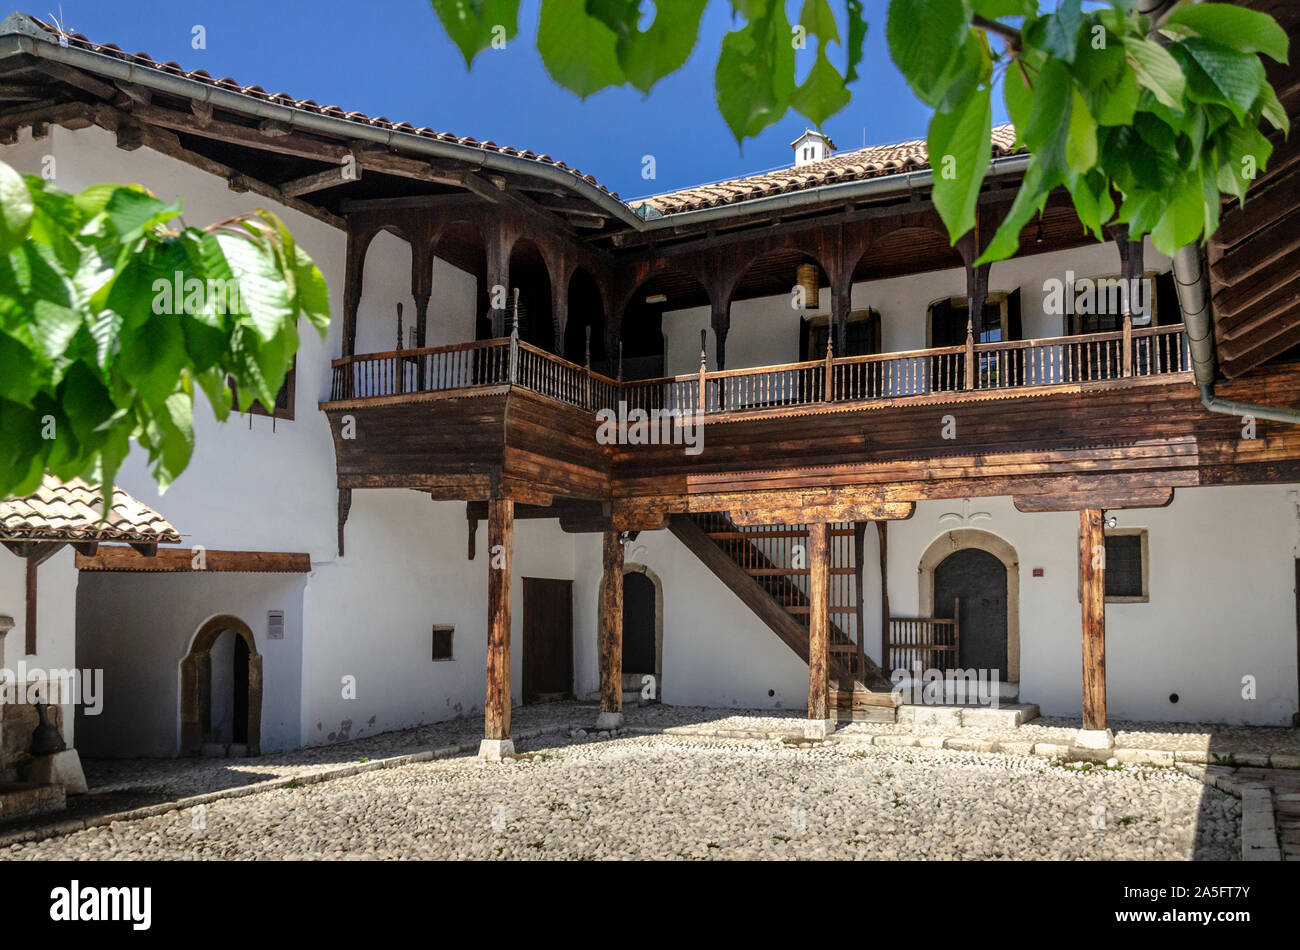 Srvo's house is a well-preserved Ottoman merchant House in the Old town of Sarajevo Stock Photo